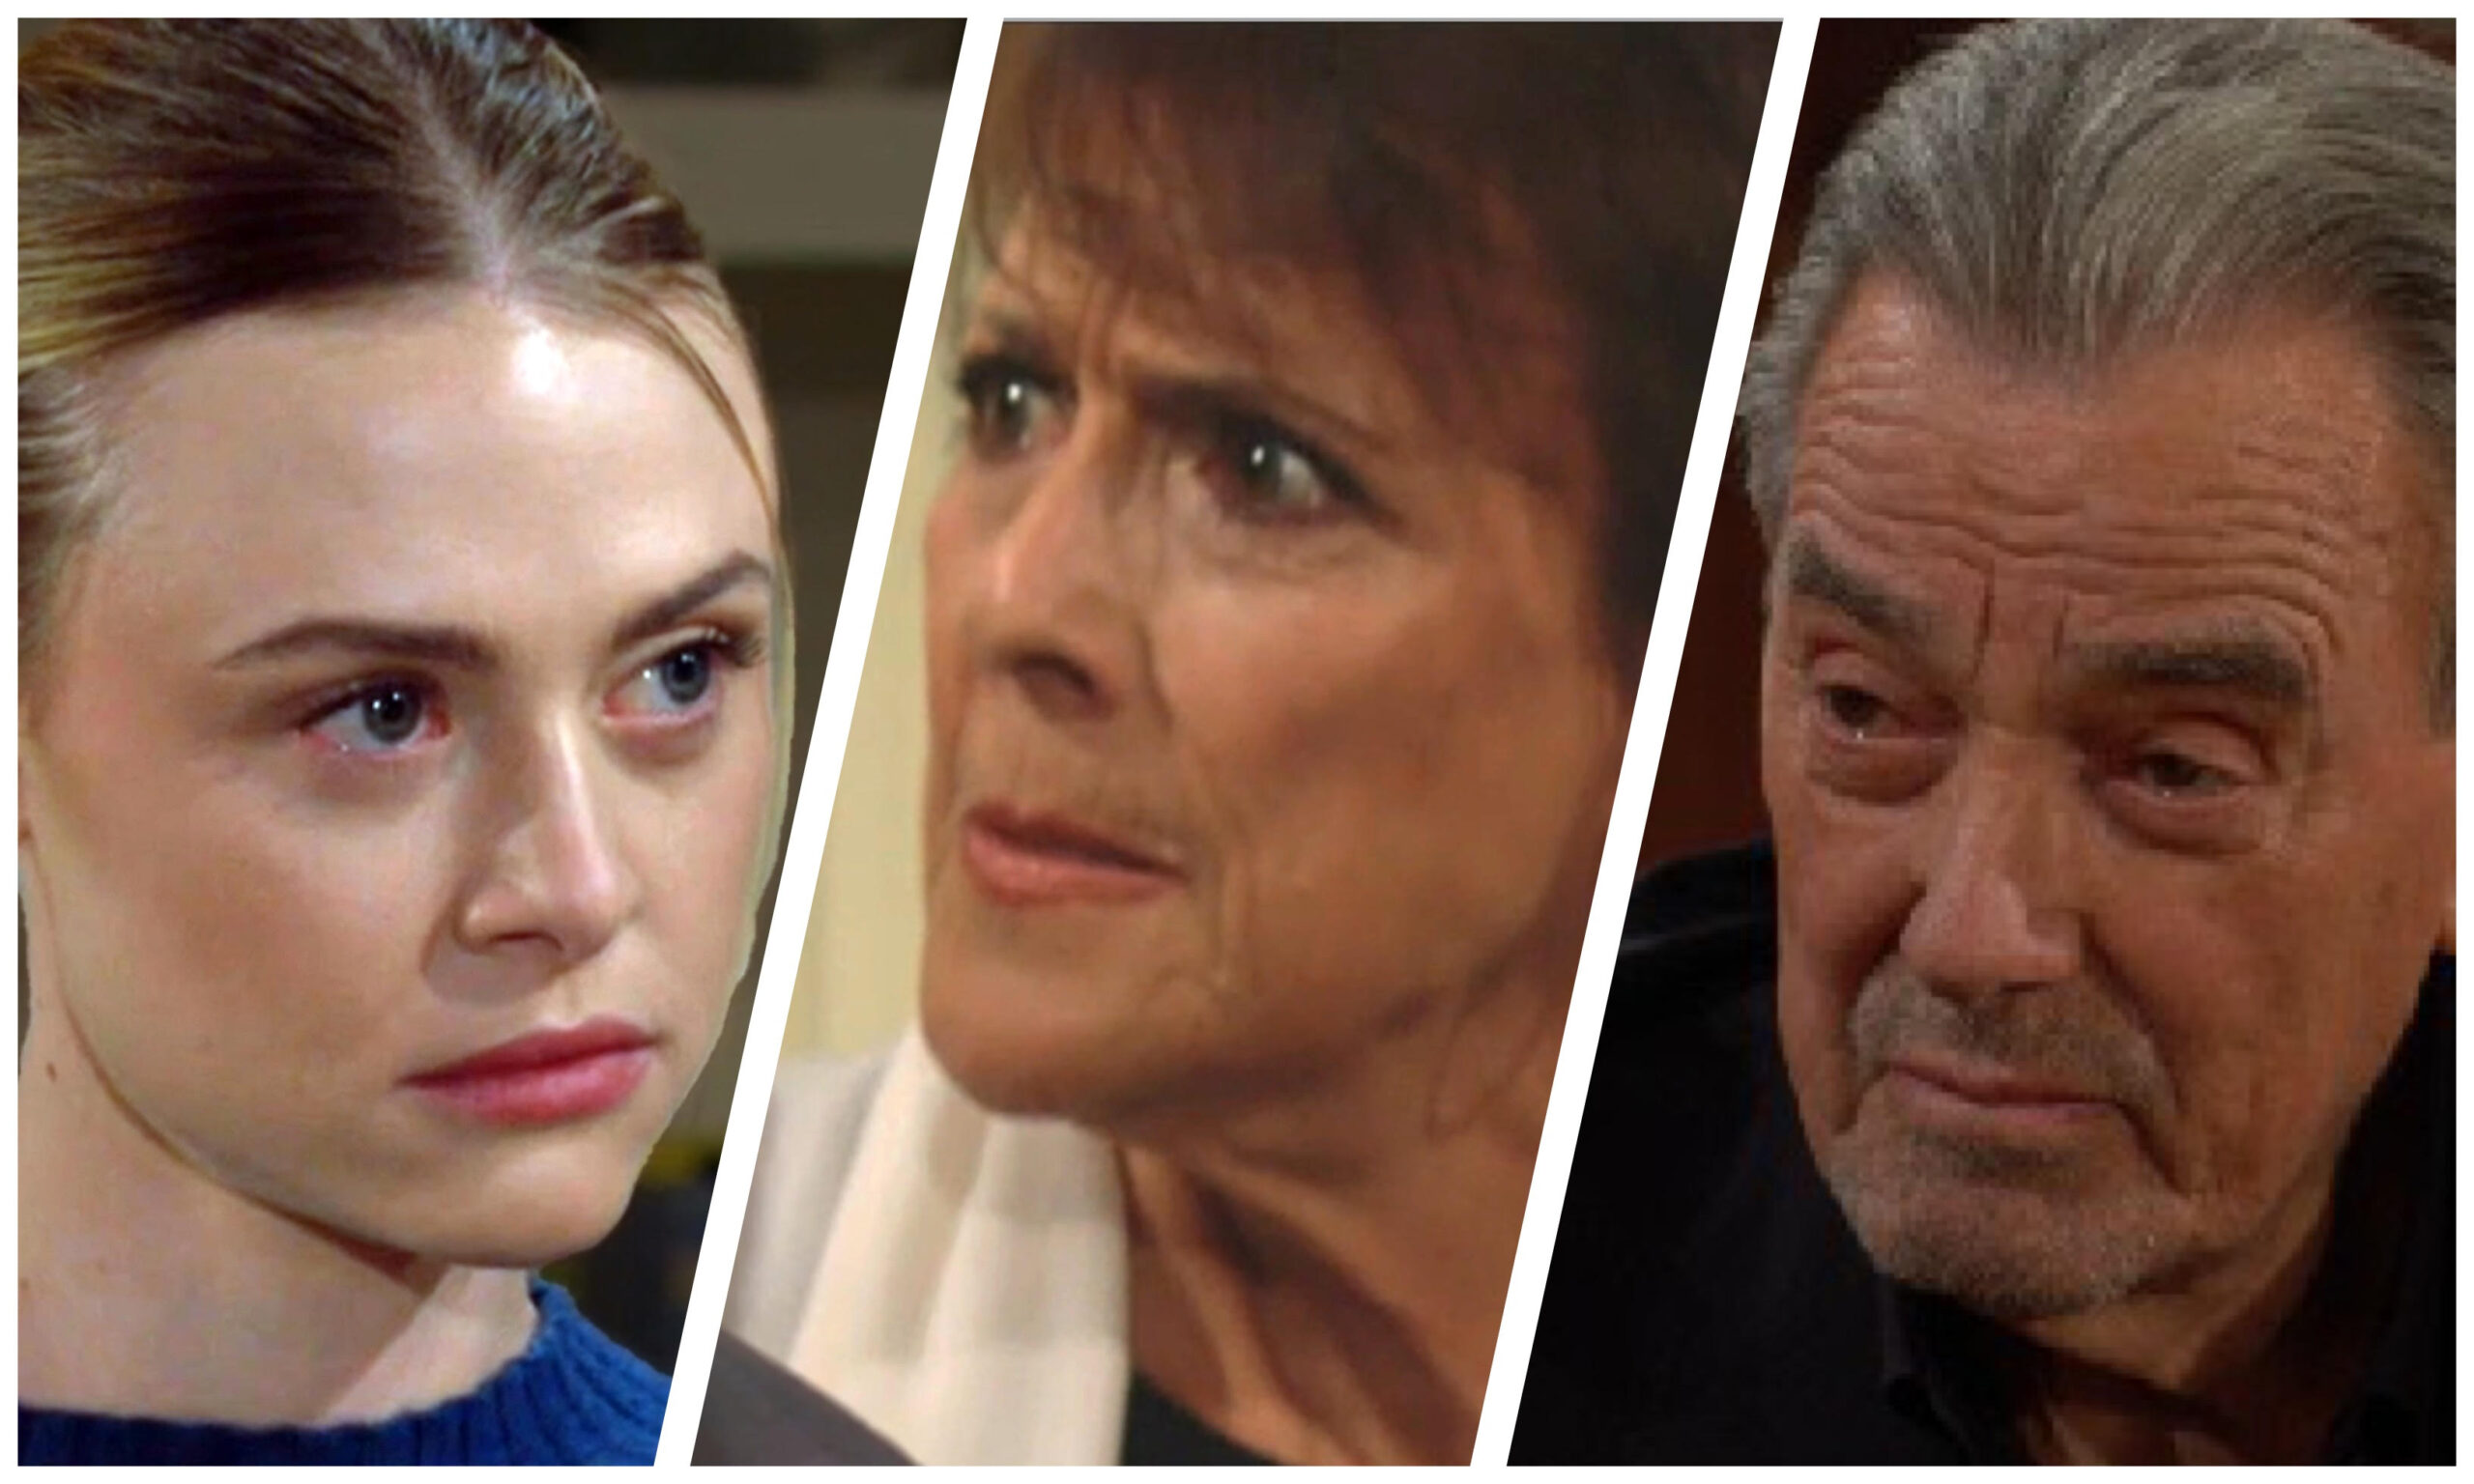 the Young and the Restless spoilers Claire Grace Jordan Victor Newman